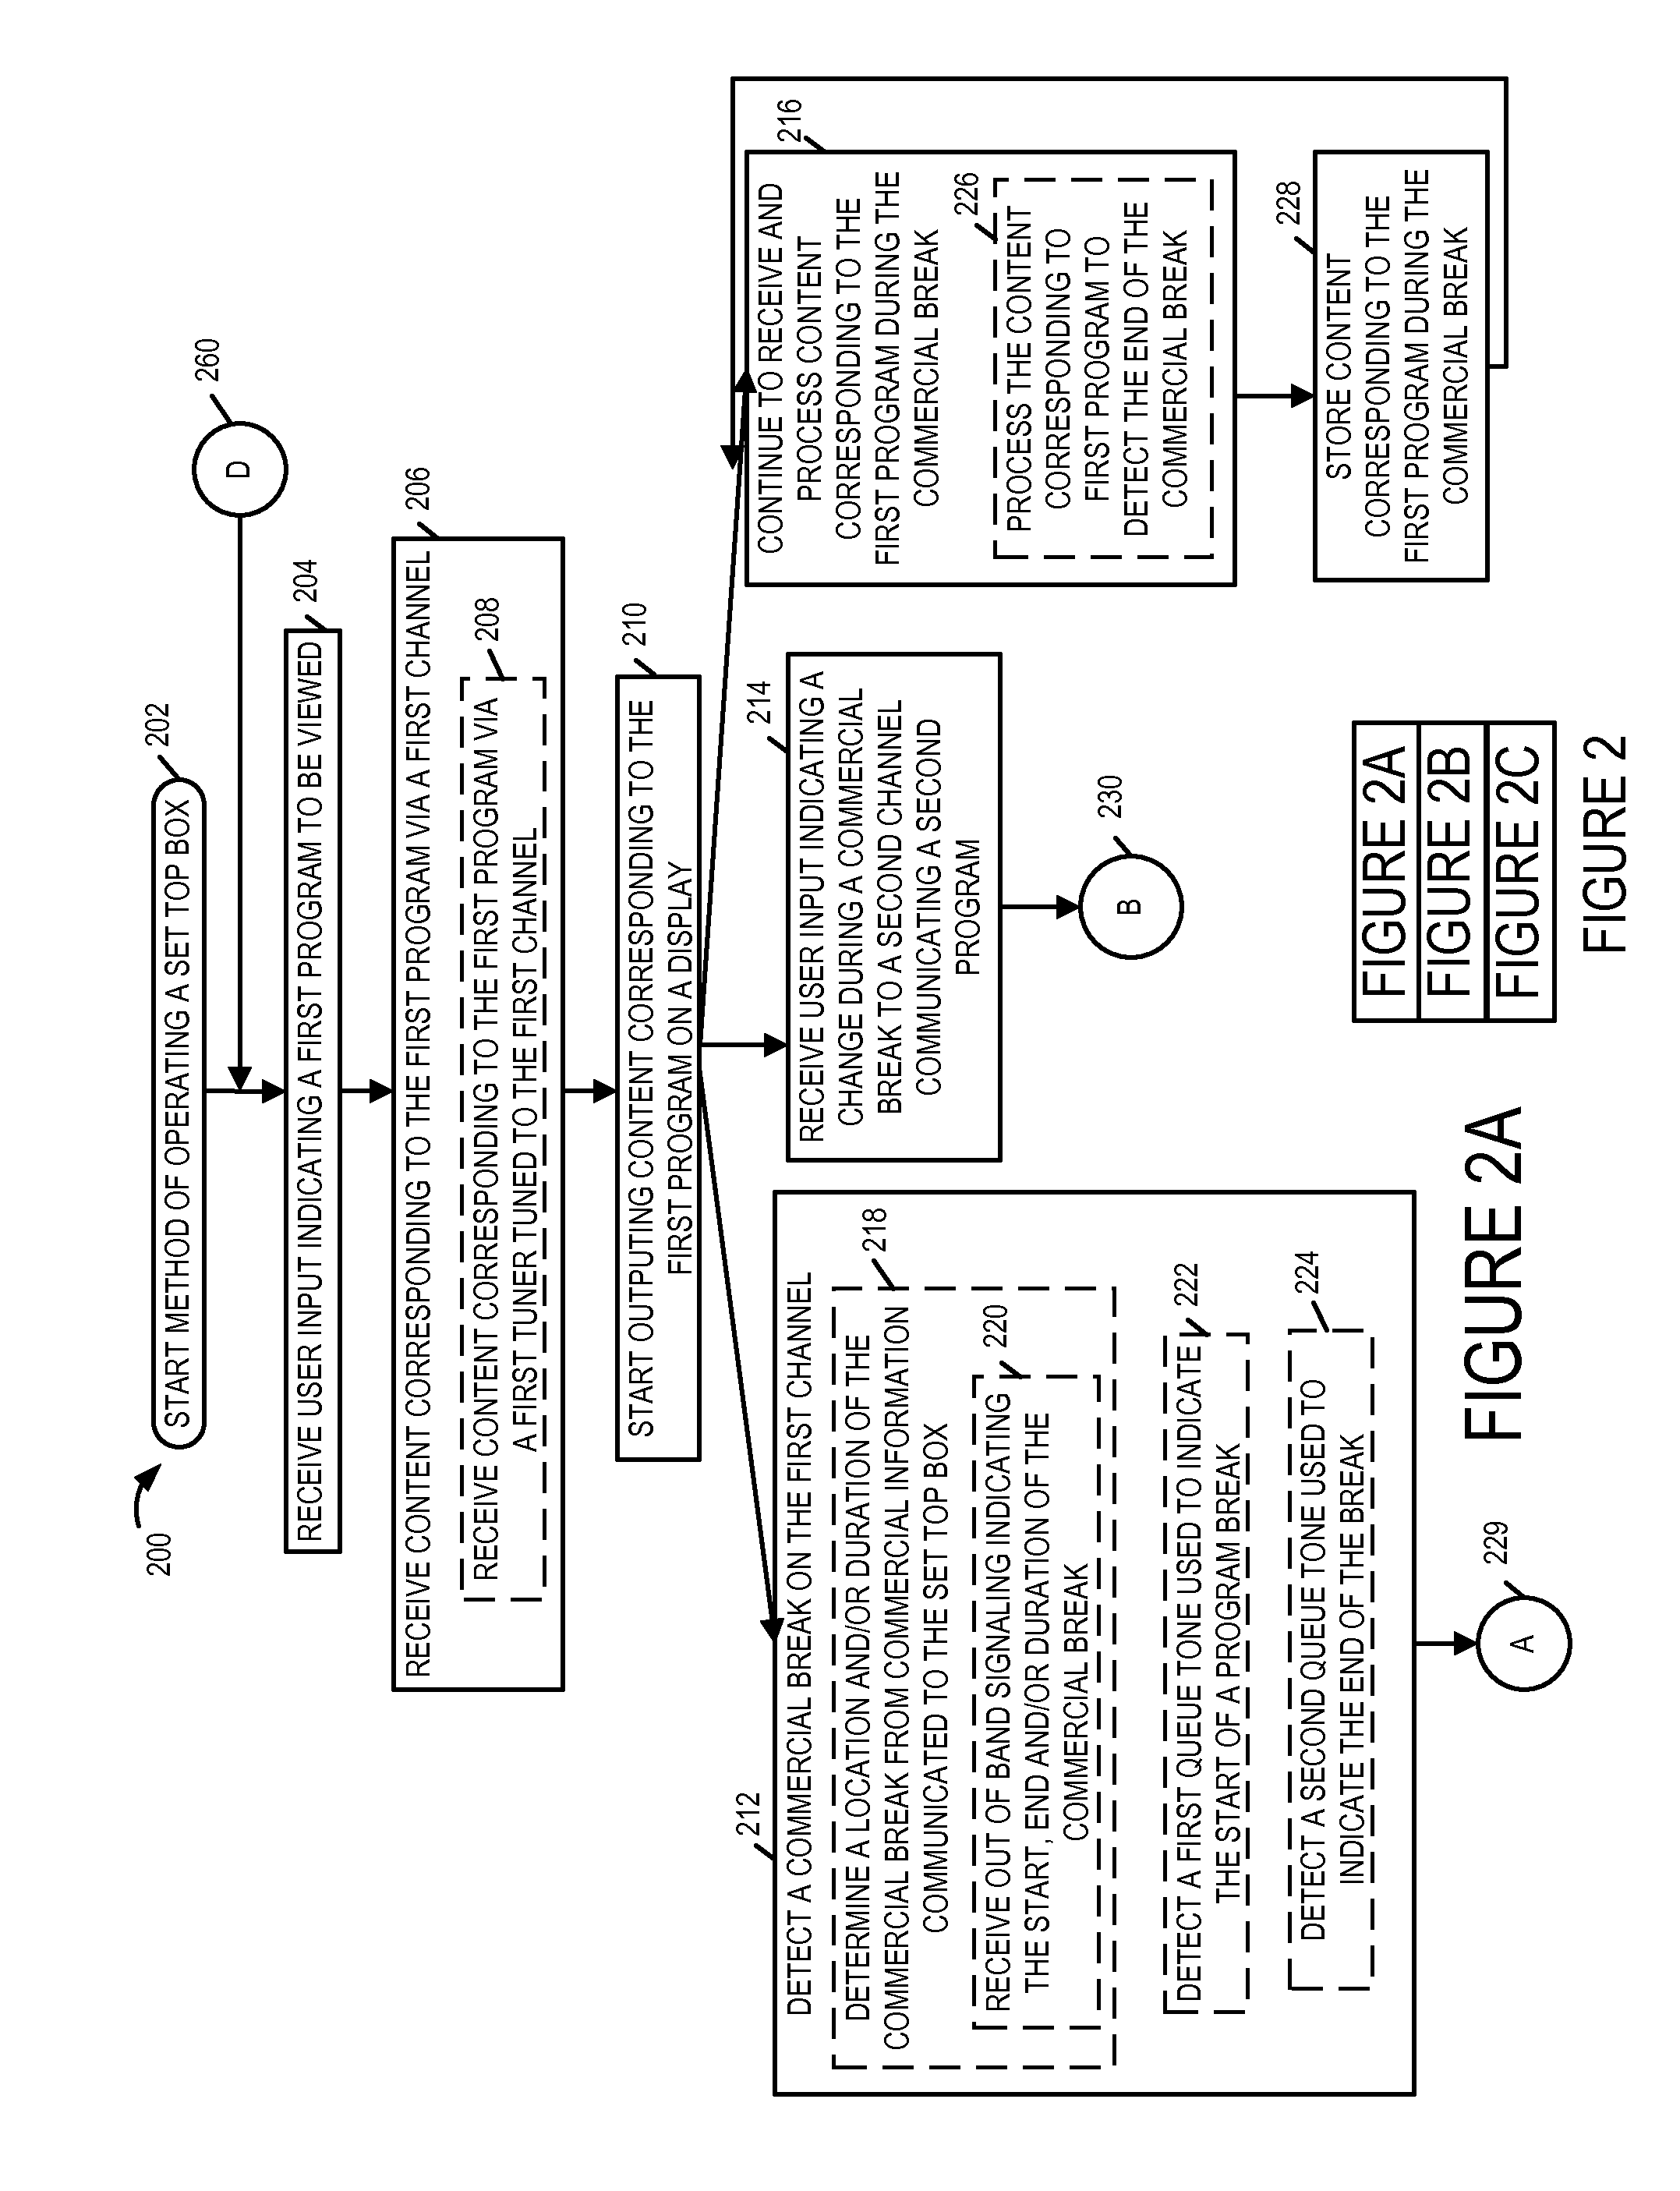 Methods and apparatus that facilitate channel switching during commercial breaks and/or other program segments